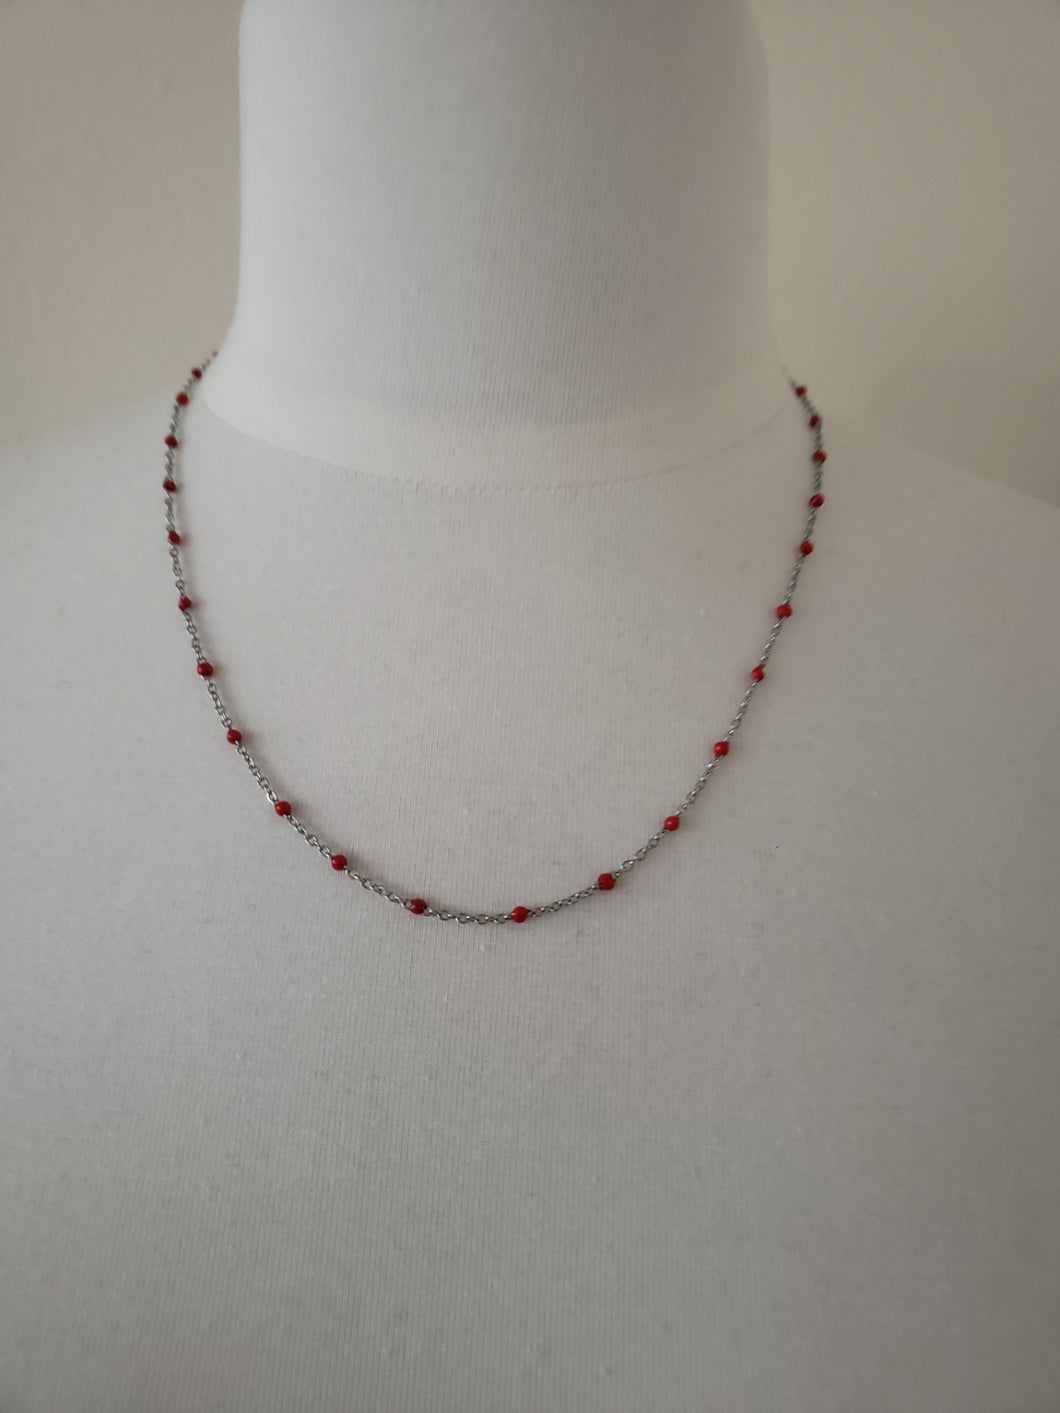 Stainless Steel Ball Bead Necklace  (Red)